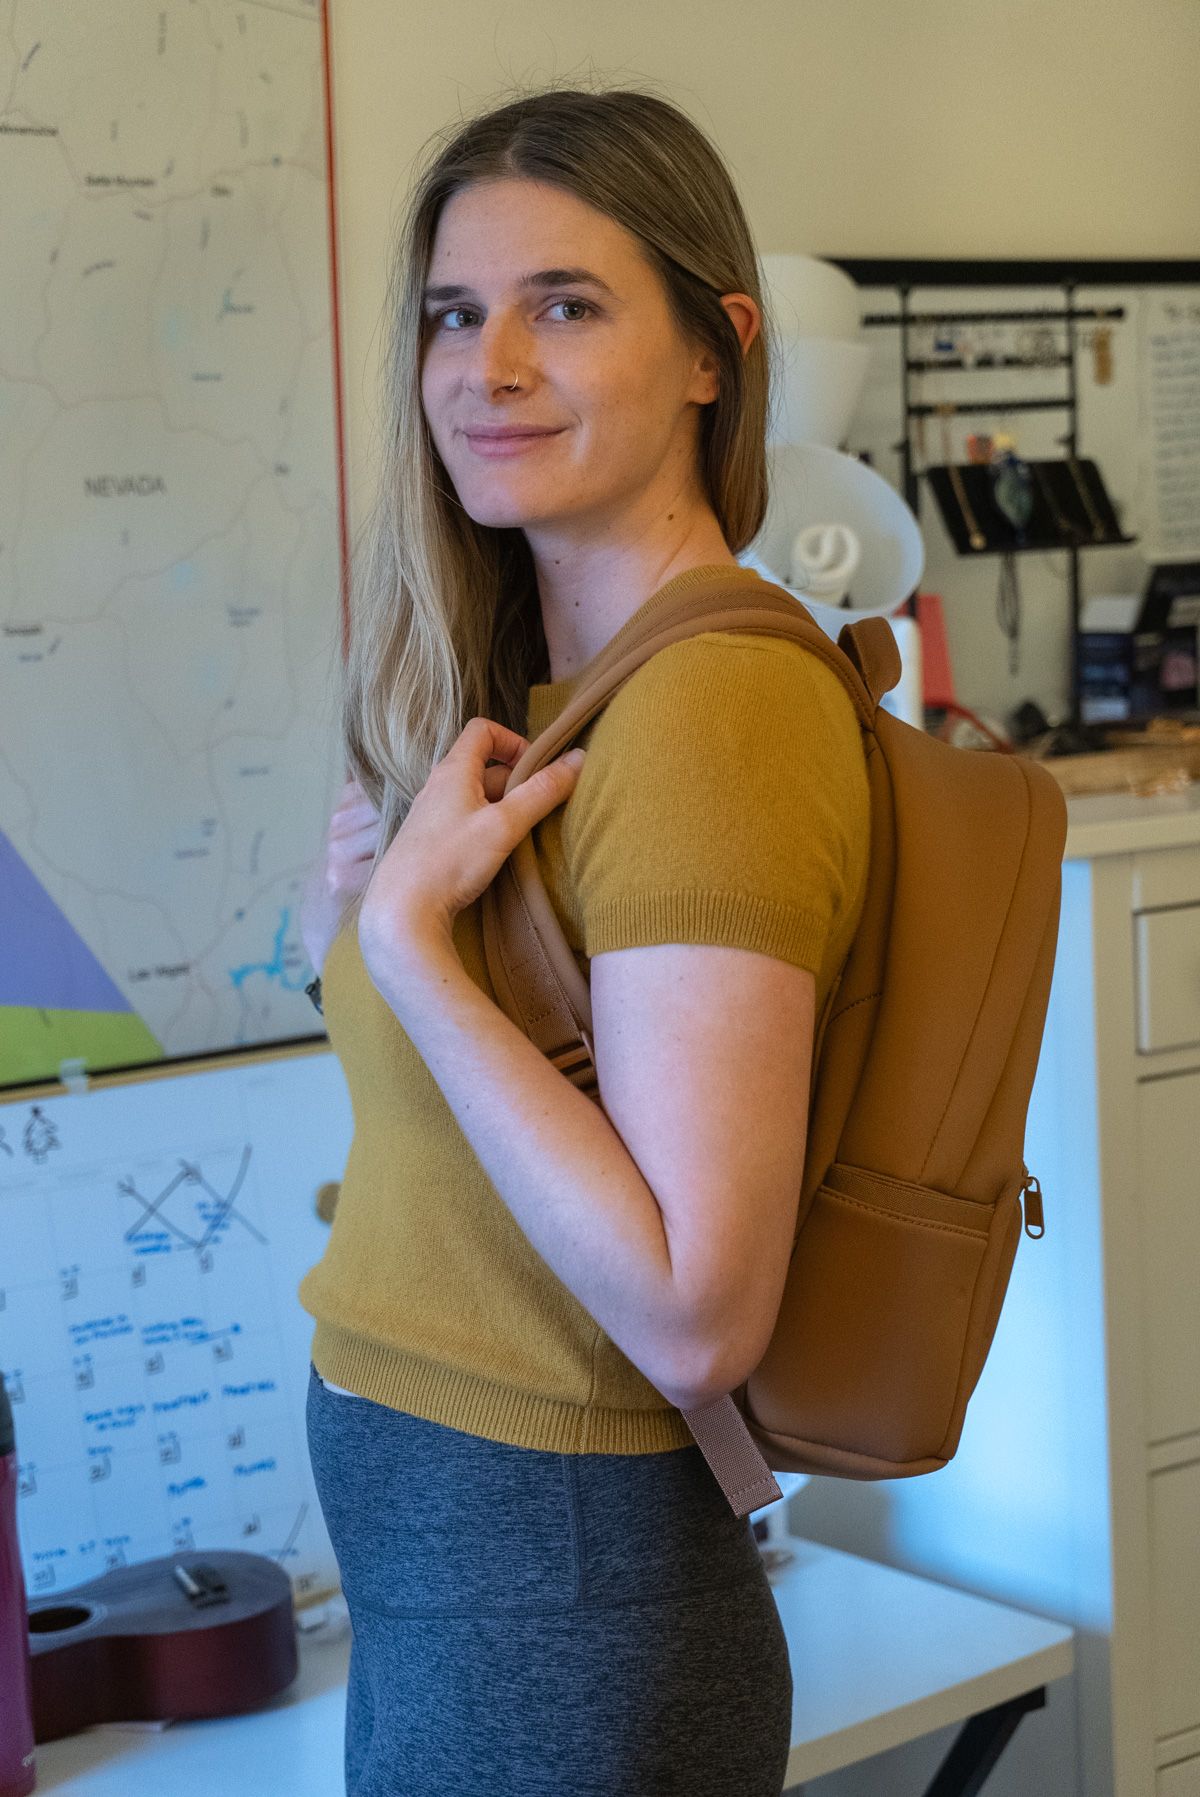 A young woman wearing a brown Neoprene Backpack, grey Ultra-Soft High-Rise Leggings and a yellow shirt stands to the side looking over her shoulder at the camera in an interior setting.